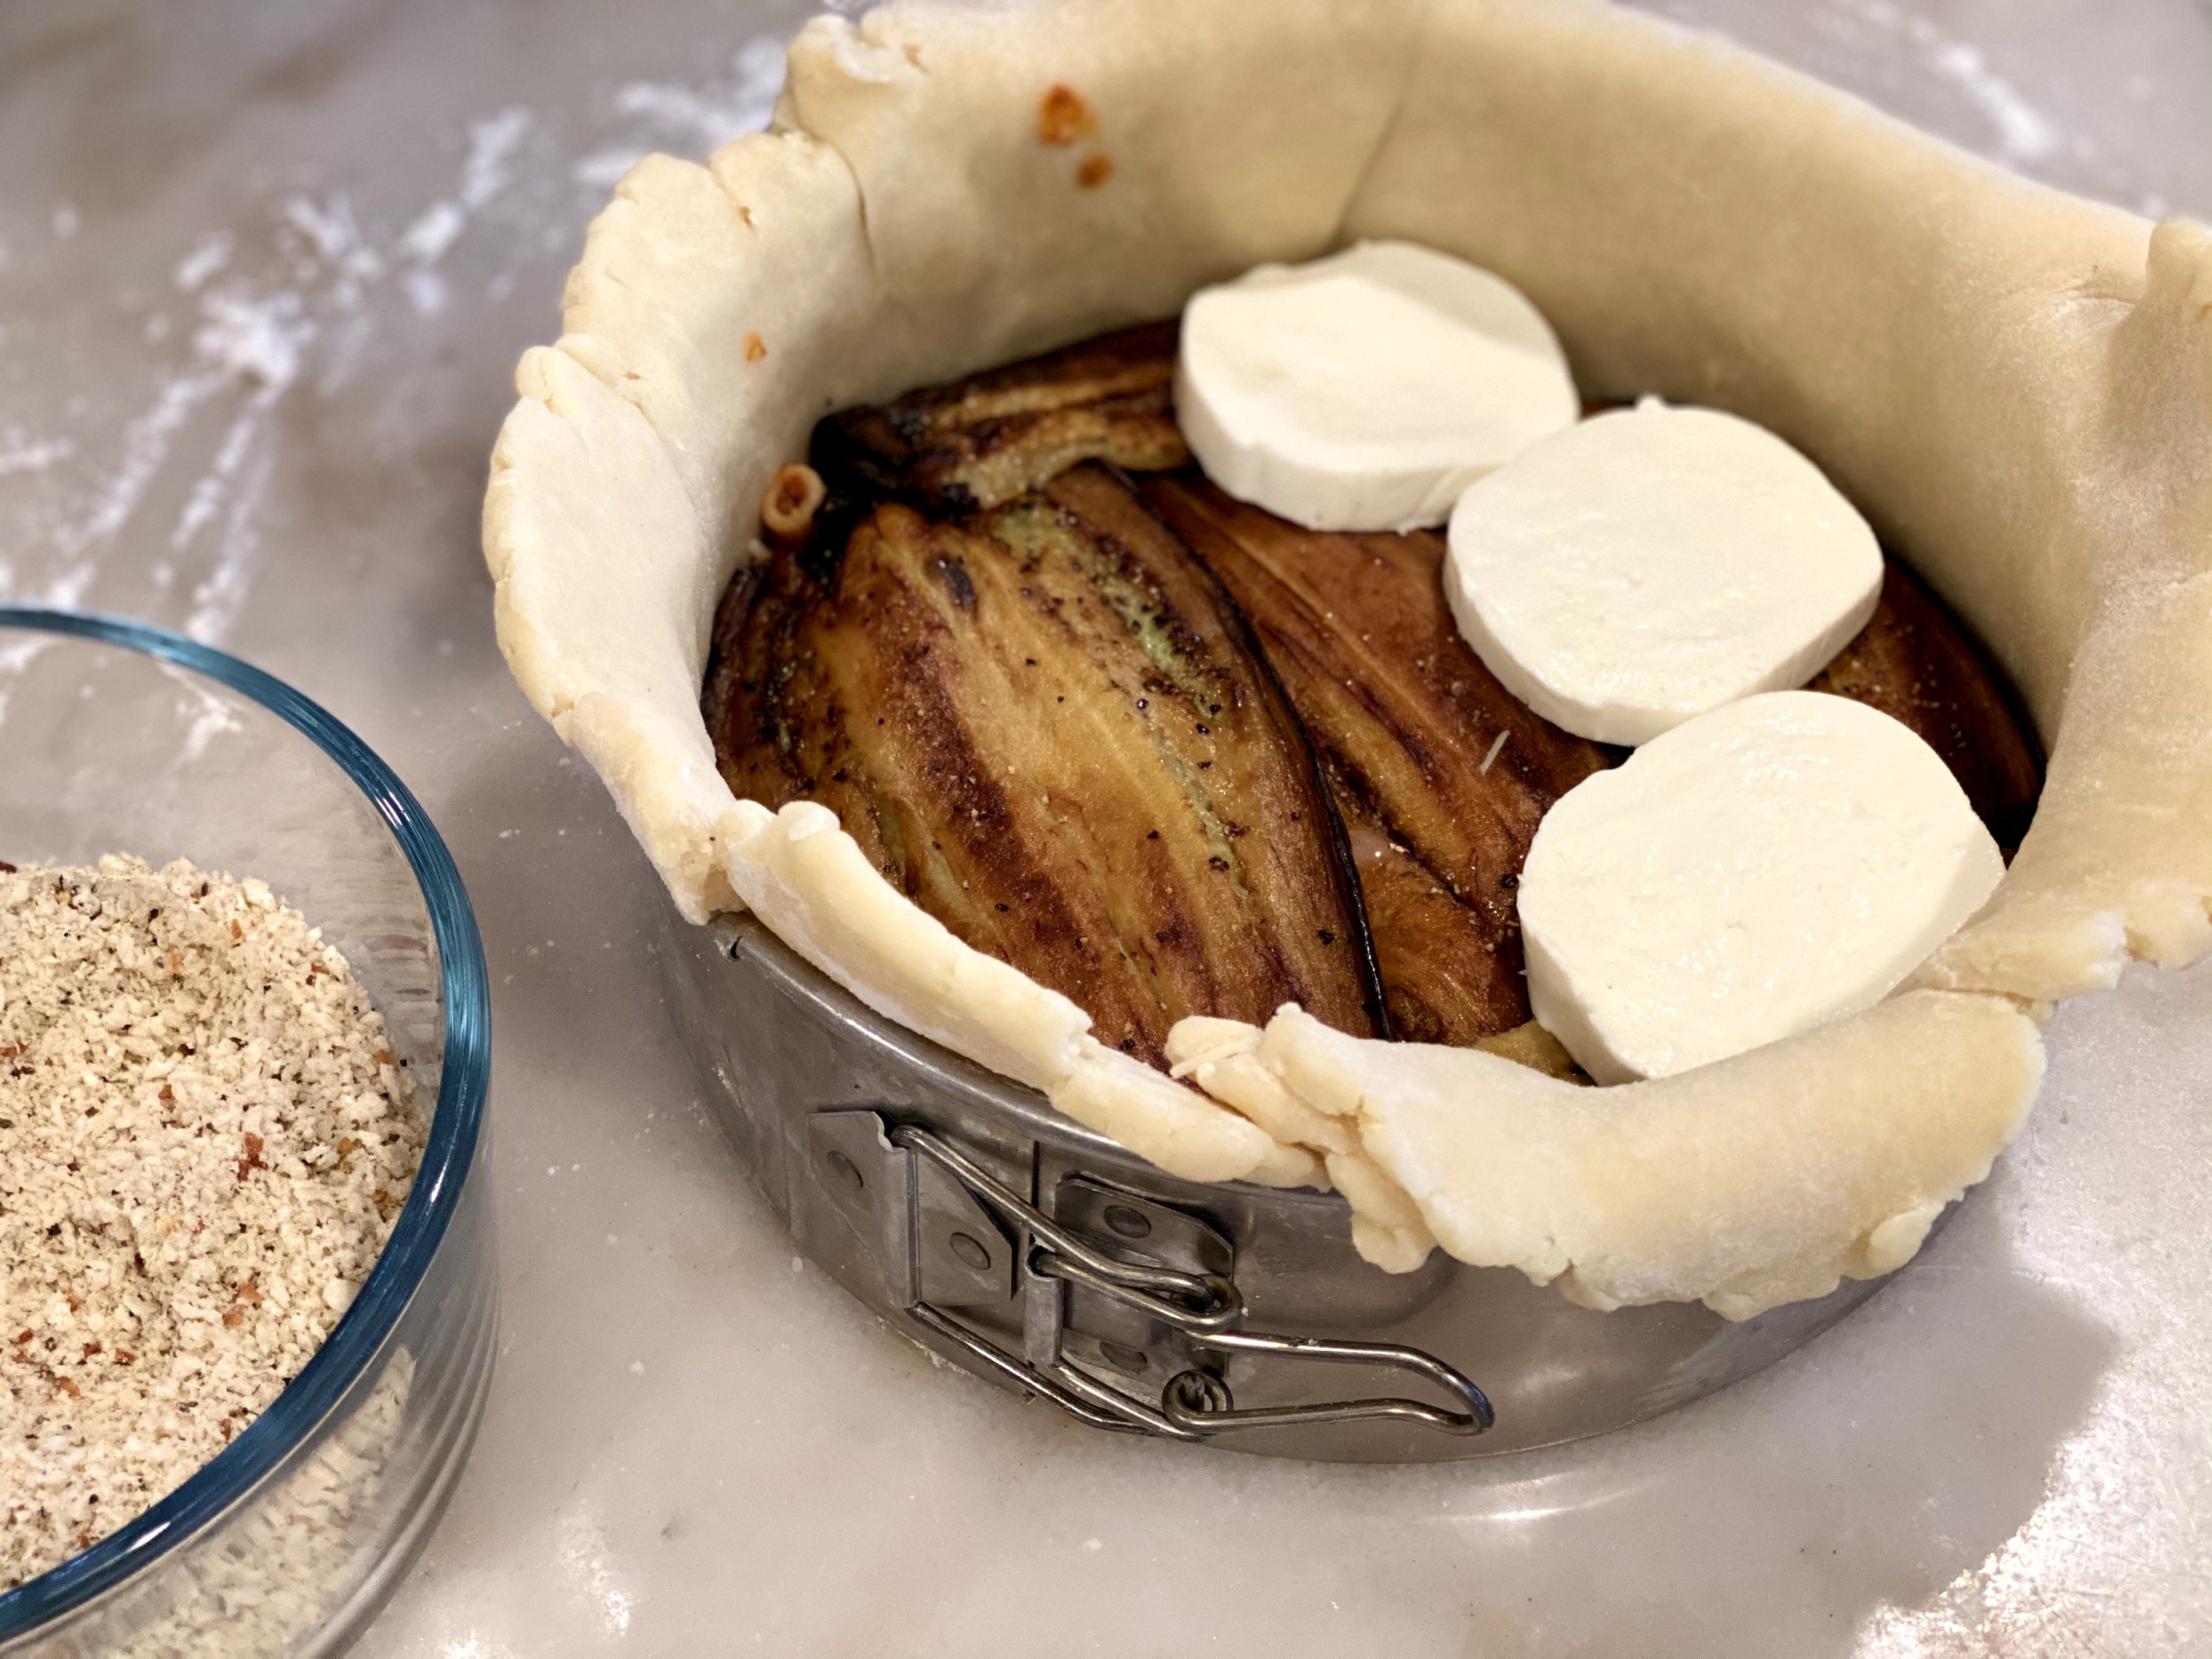 Adding layers of eggplant and fresh thick cut mozzarella to the timballo pie. 